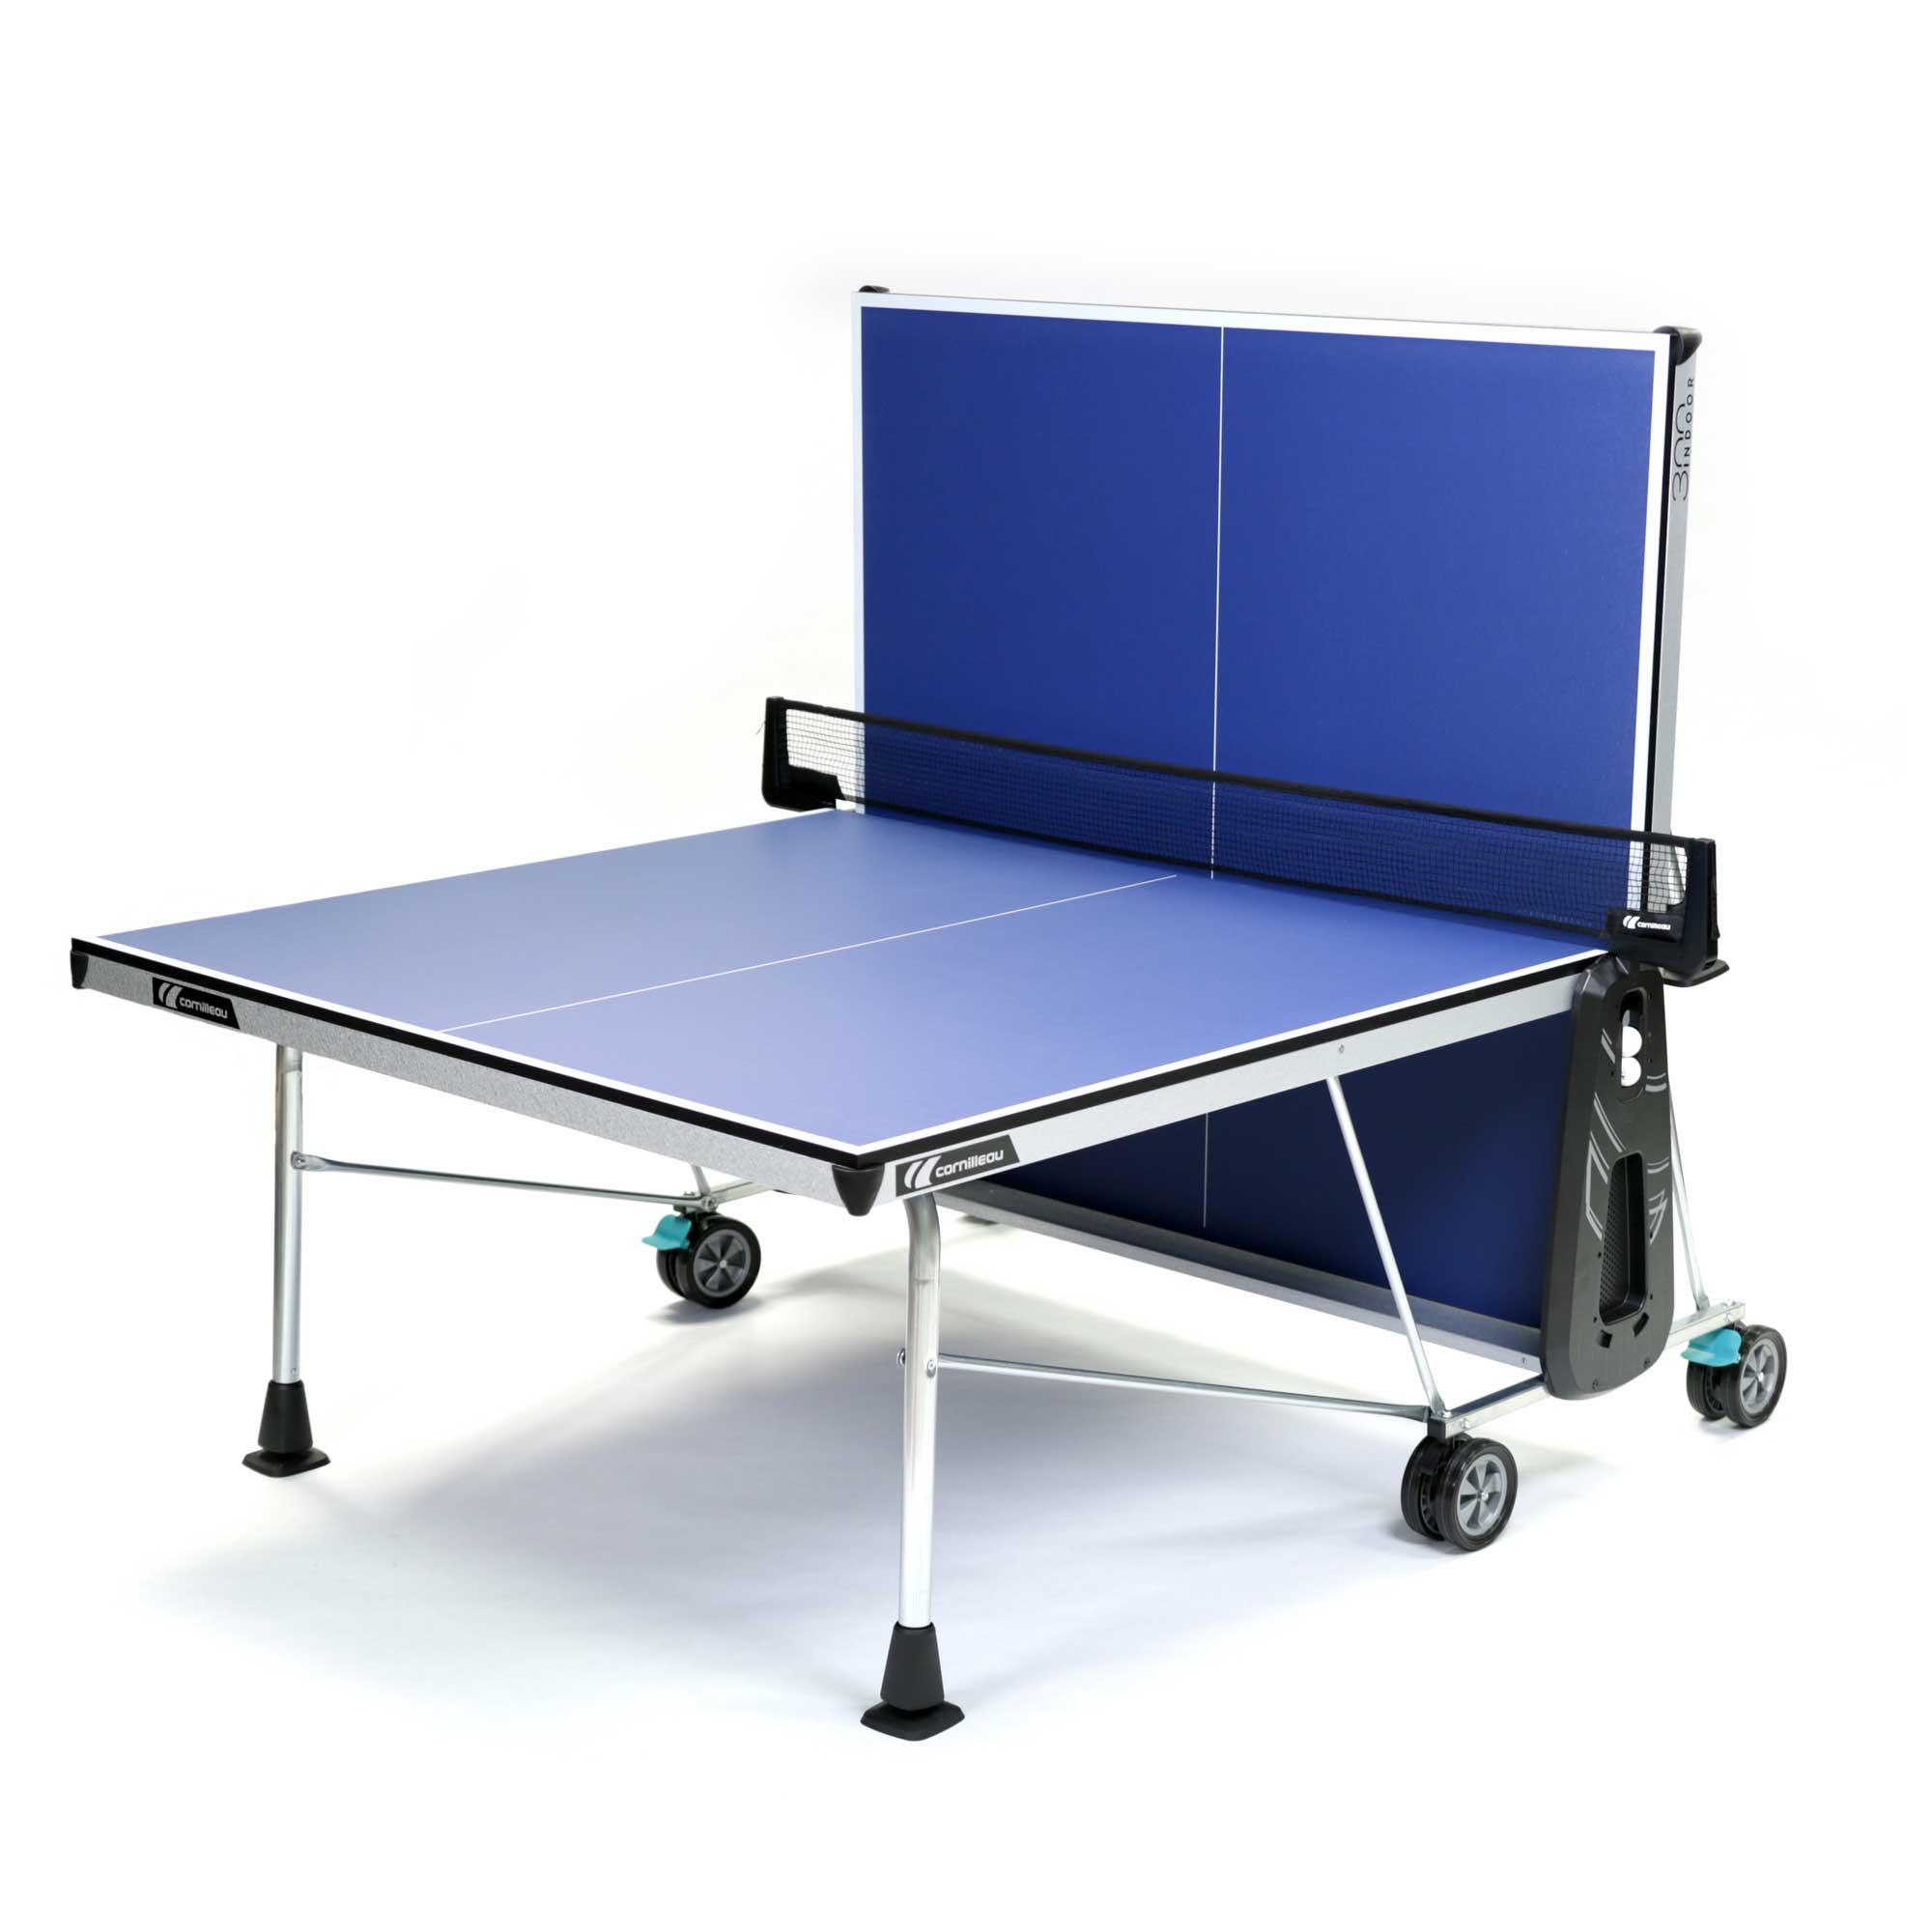 NEW 300 Indoor Table Tennis Table - Blue 2/8